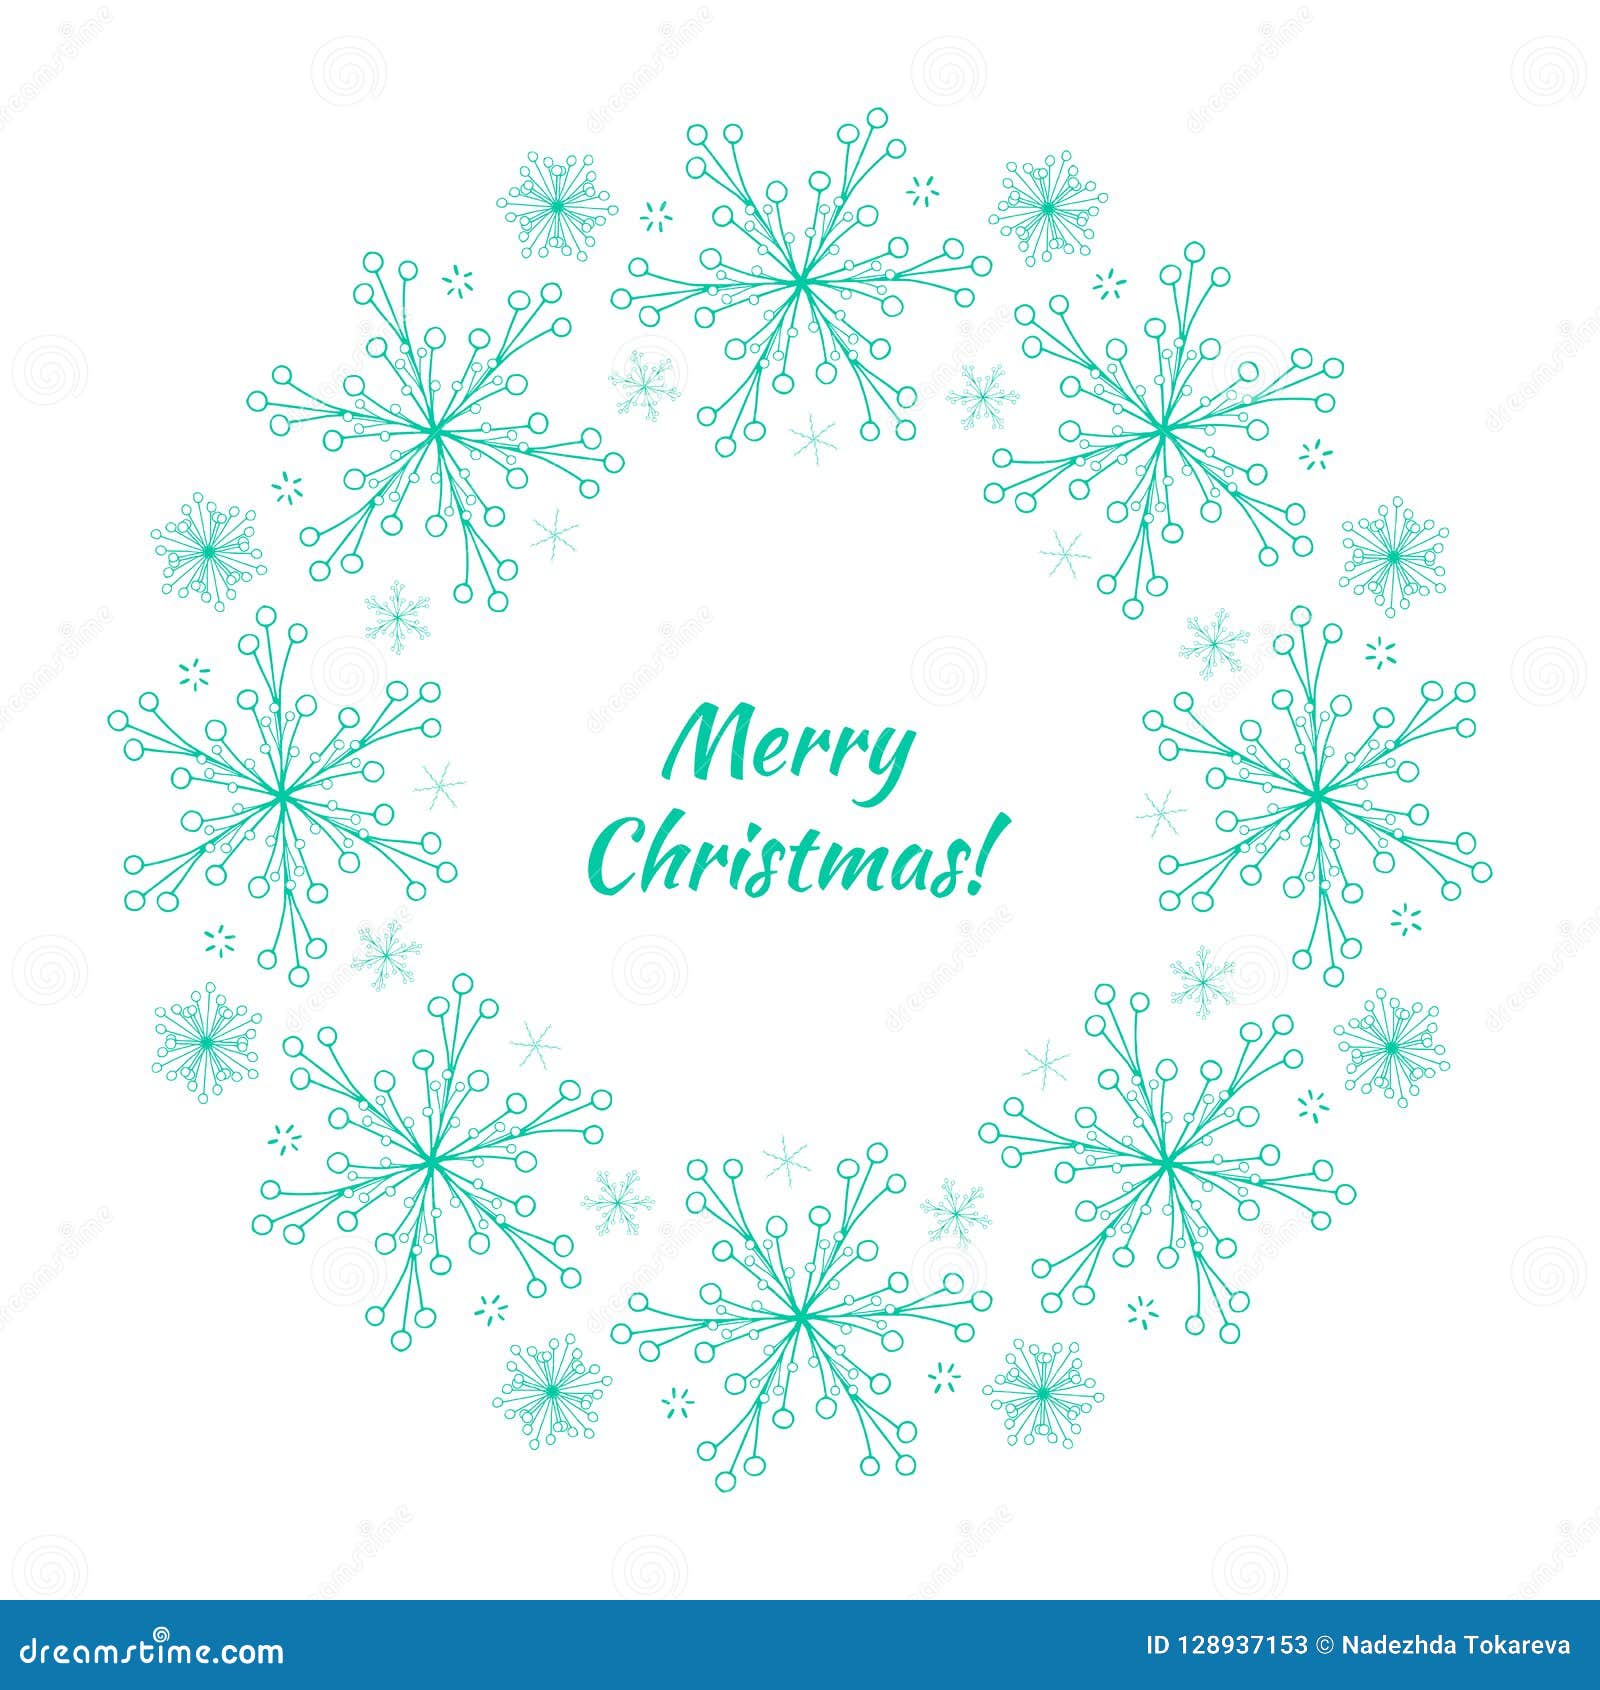 Beautiful Wreath with Teal Blue Snowflakes Stock Vector - Illustration ...